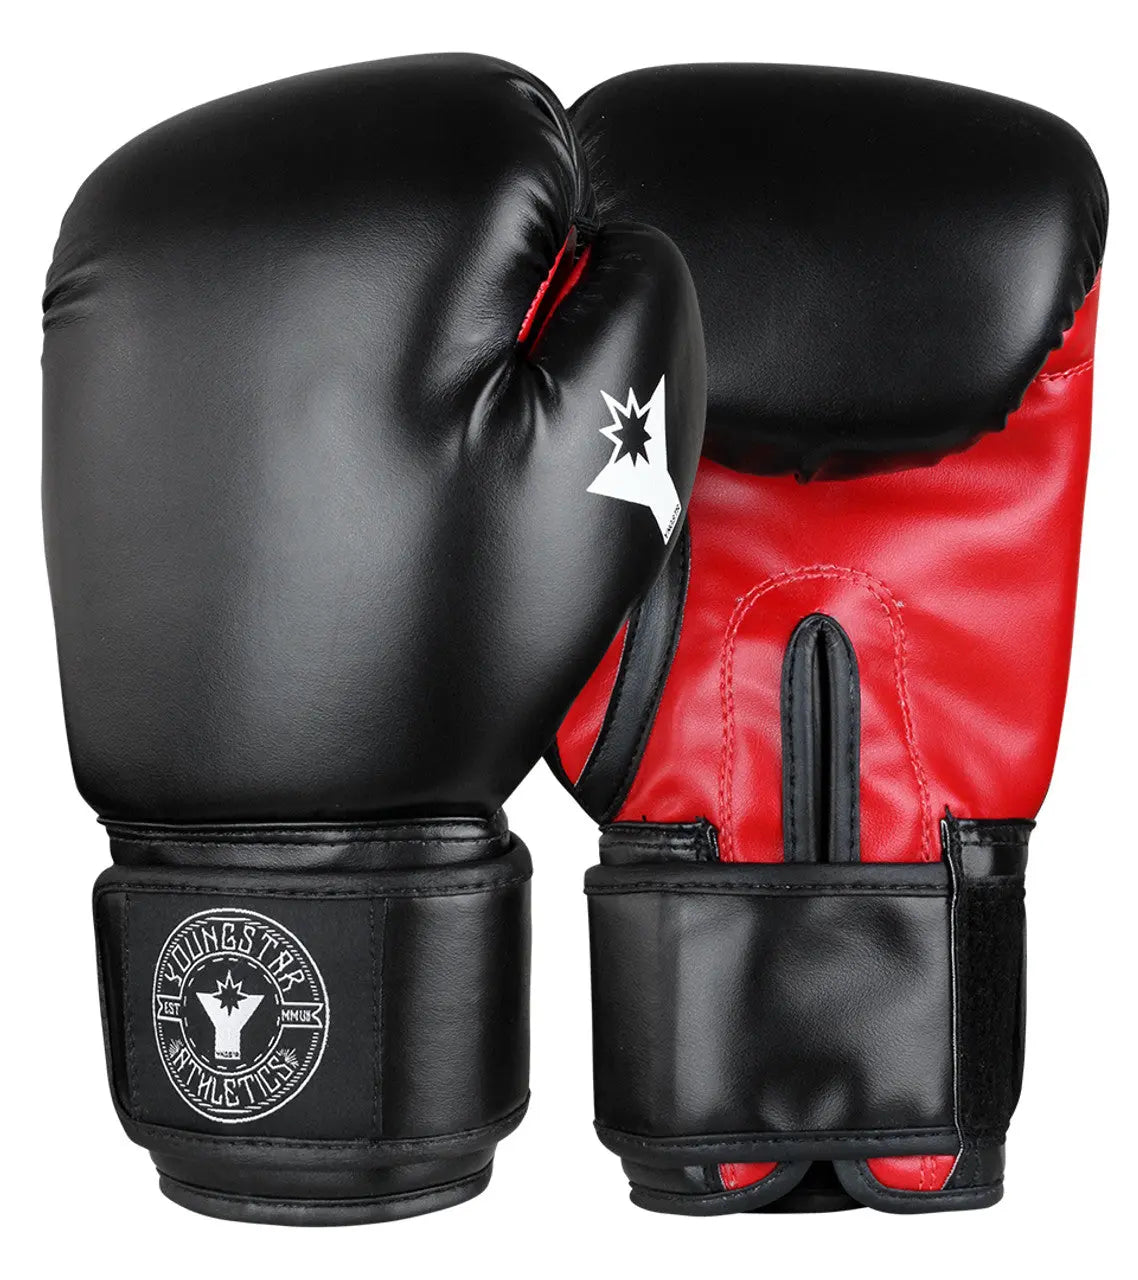 Youngstar 8oz. Youth Boxing Gloves - Prime combats YOUNGSTAR  Training Gloves